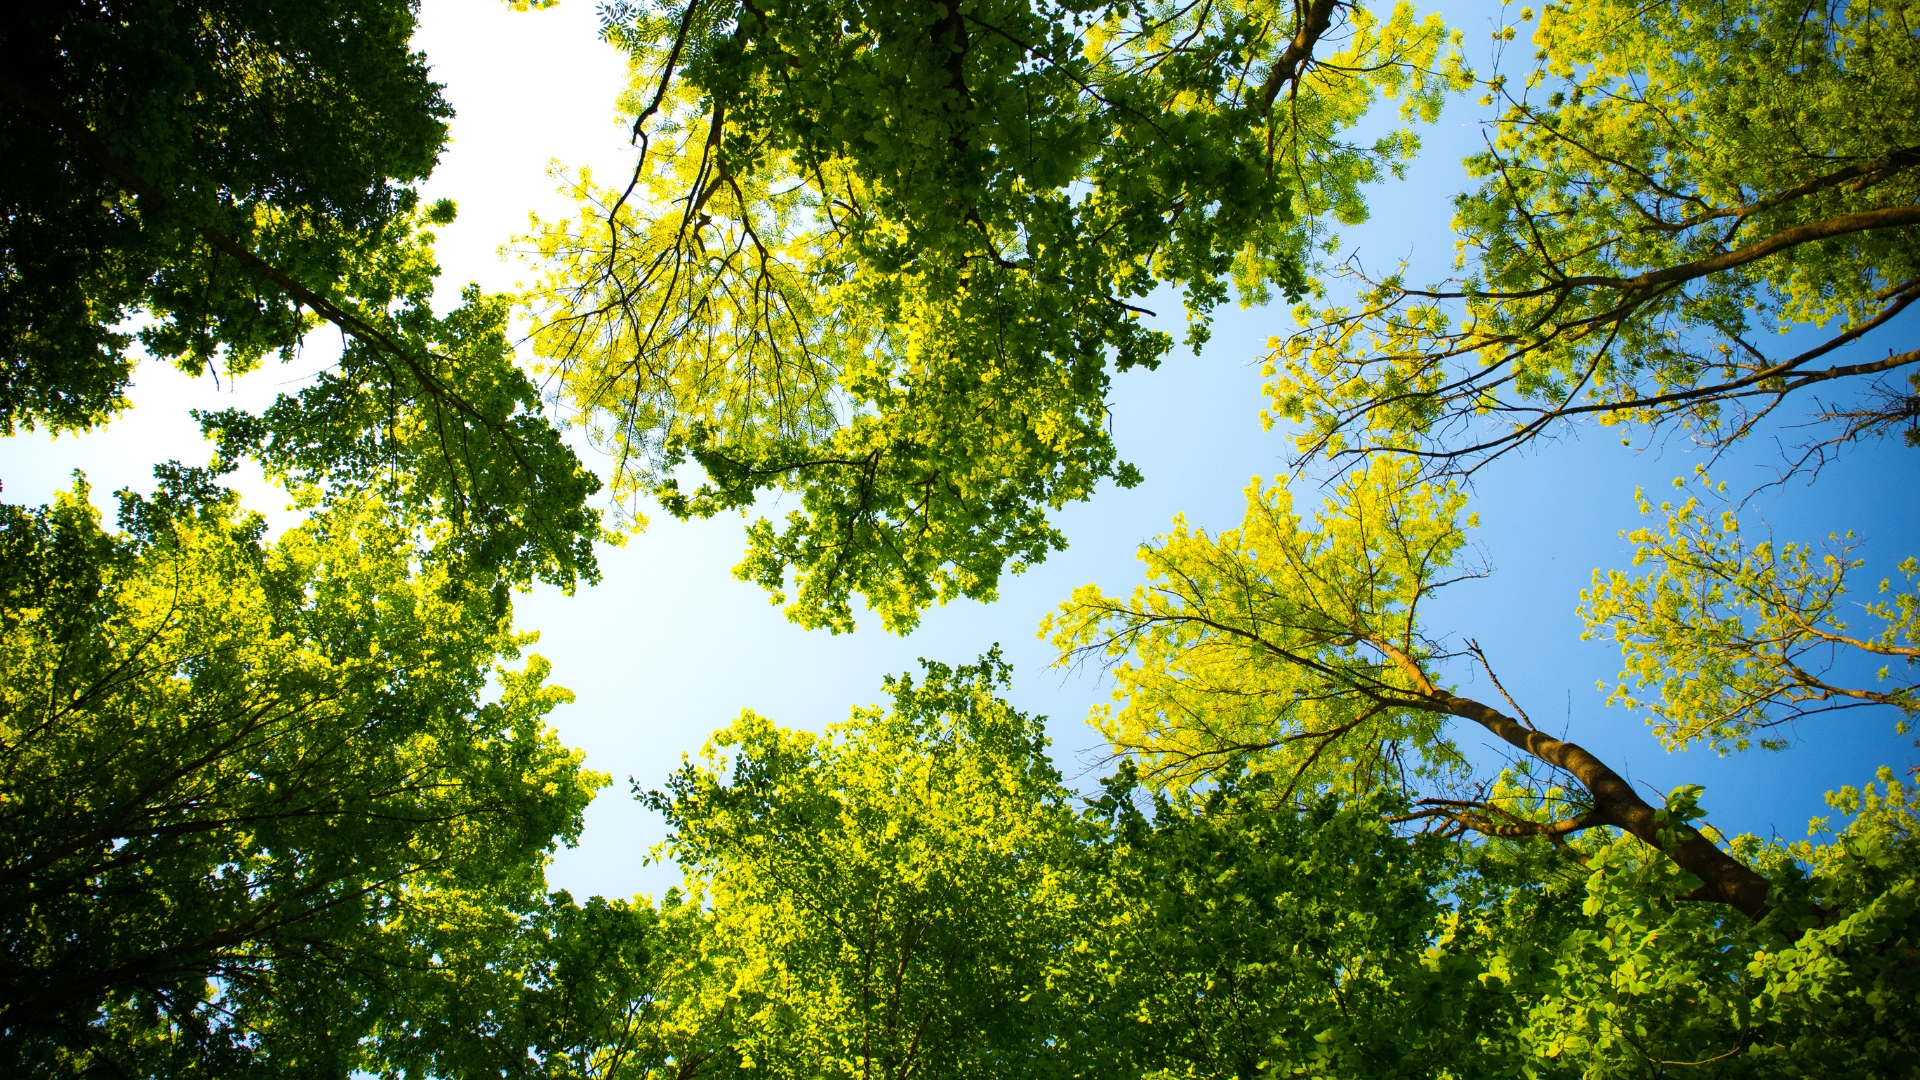 Can Leaving Trees To Grow Actually Fix Our Carbon Emission Issue?